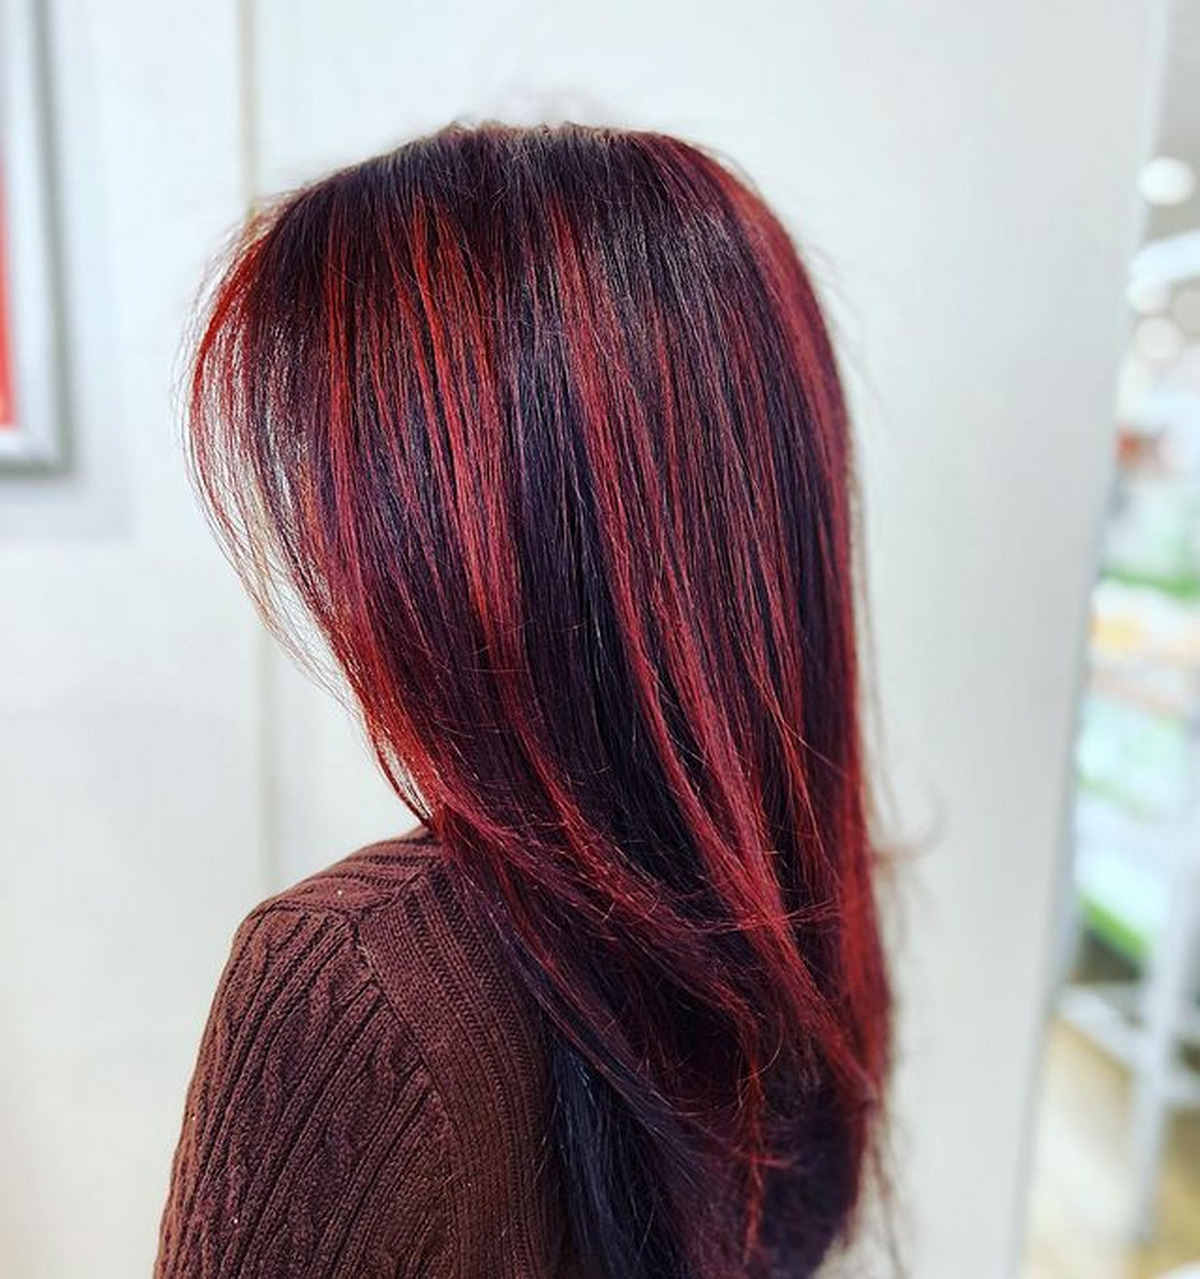 Basic Black Straight Hair With Red Highlights